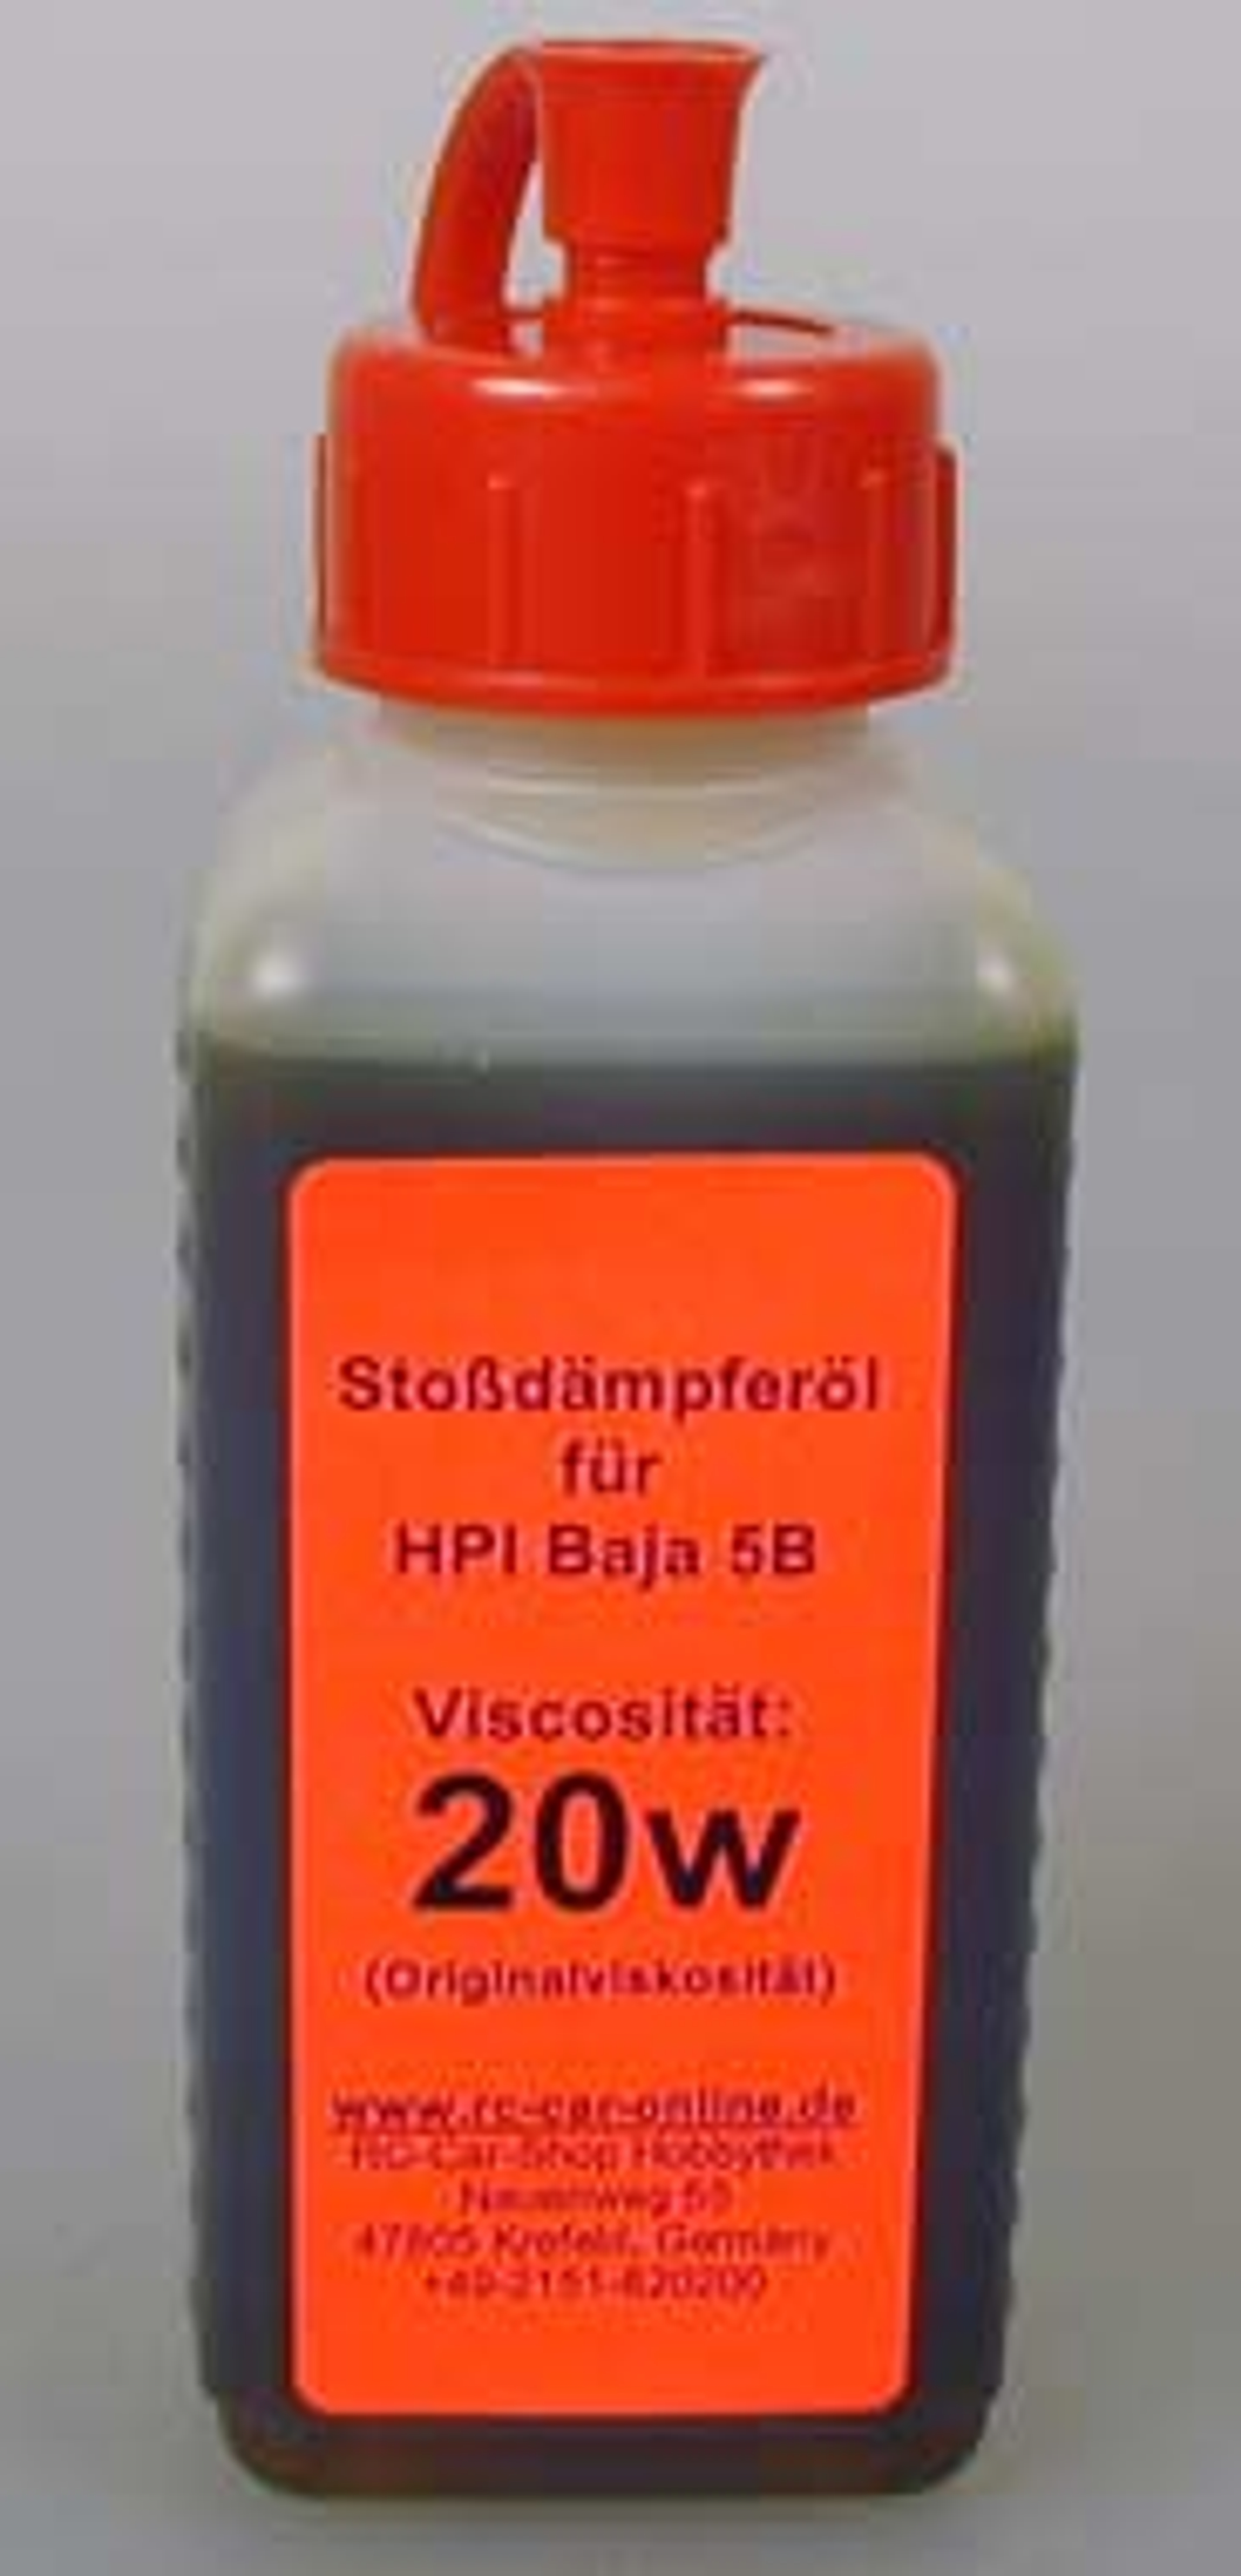 Shock absorber oil 20W for HPI and Mecatech Klick-Shocks, y0058/20, 1 pce.